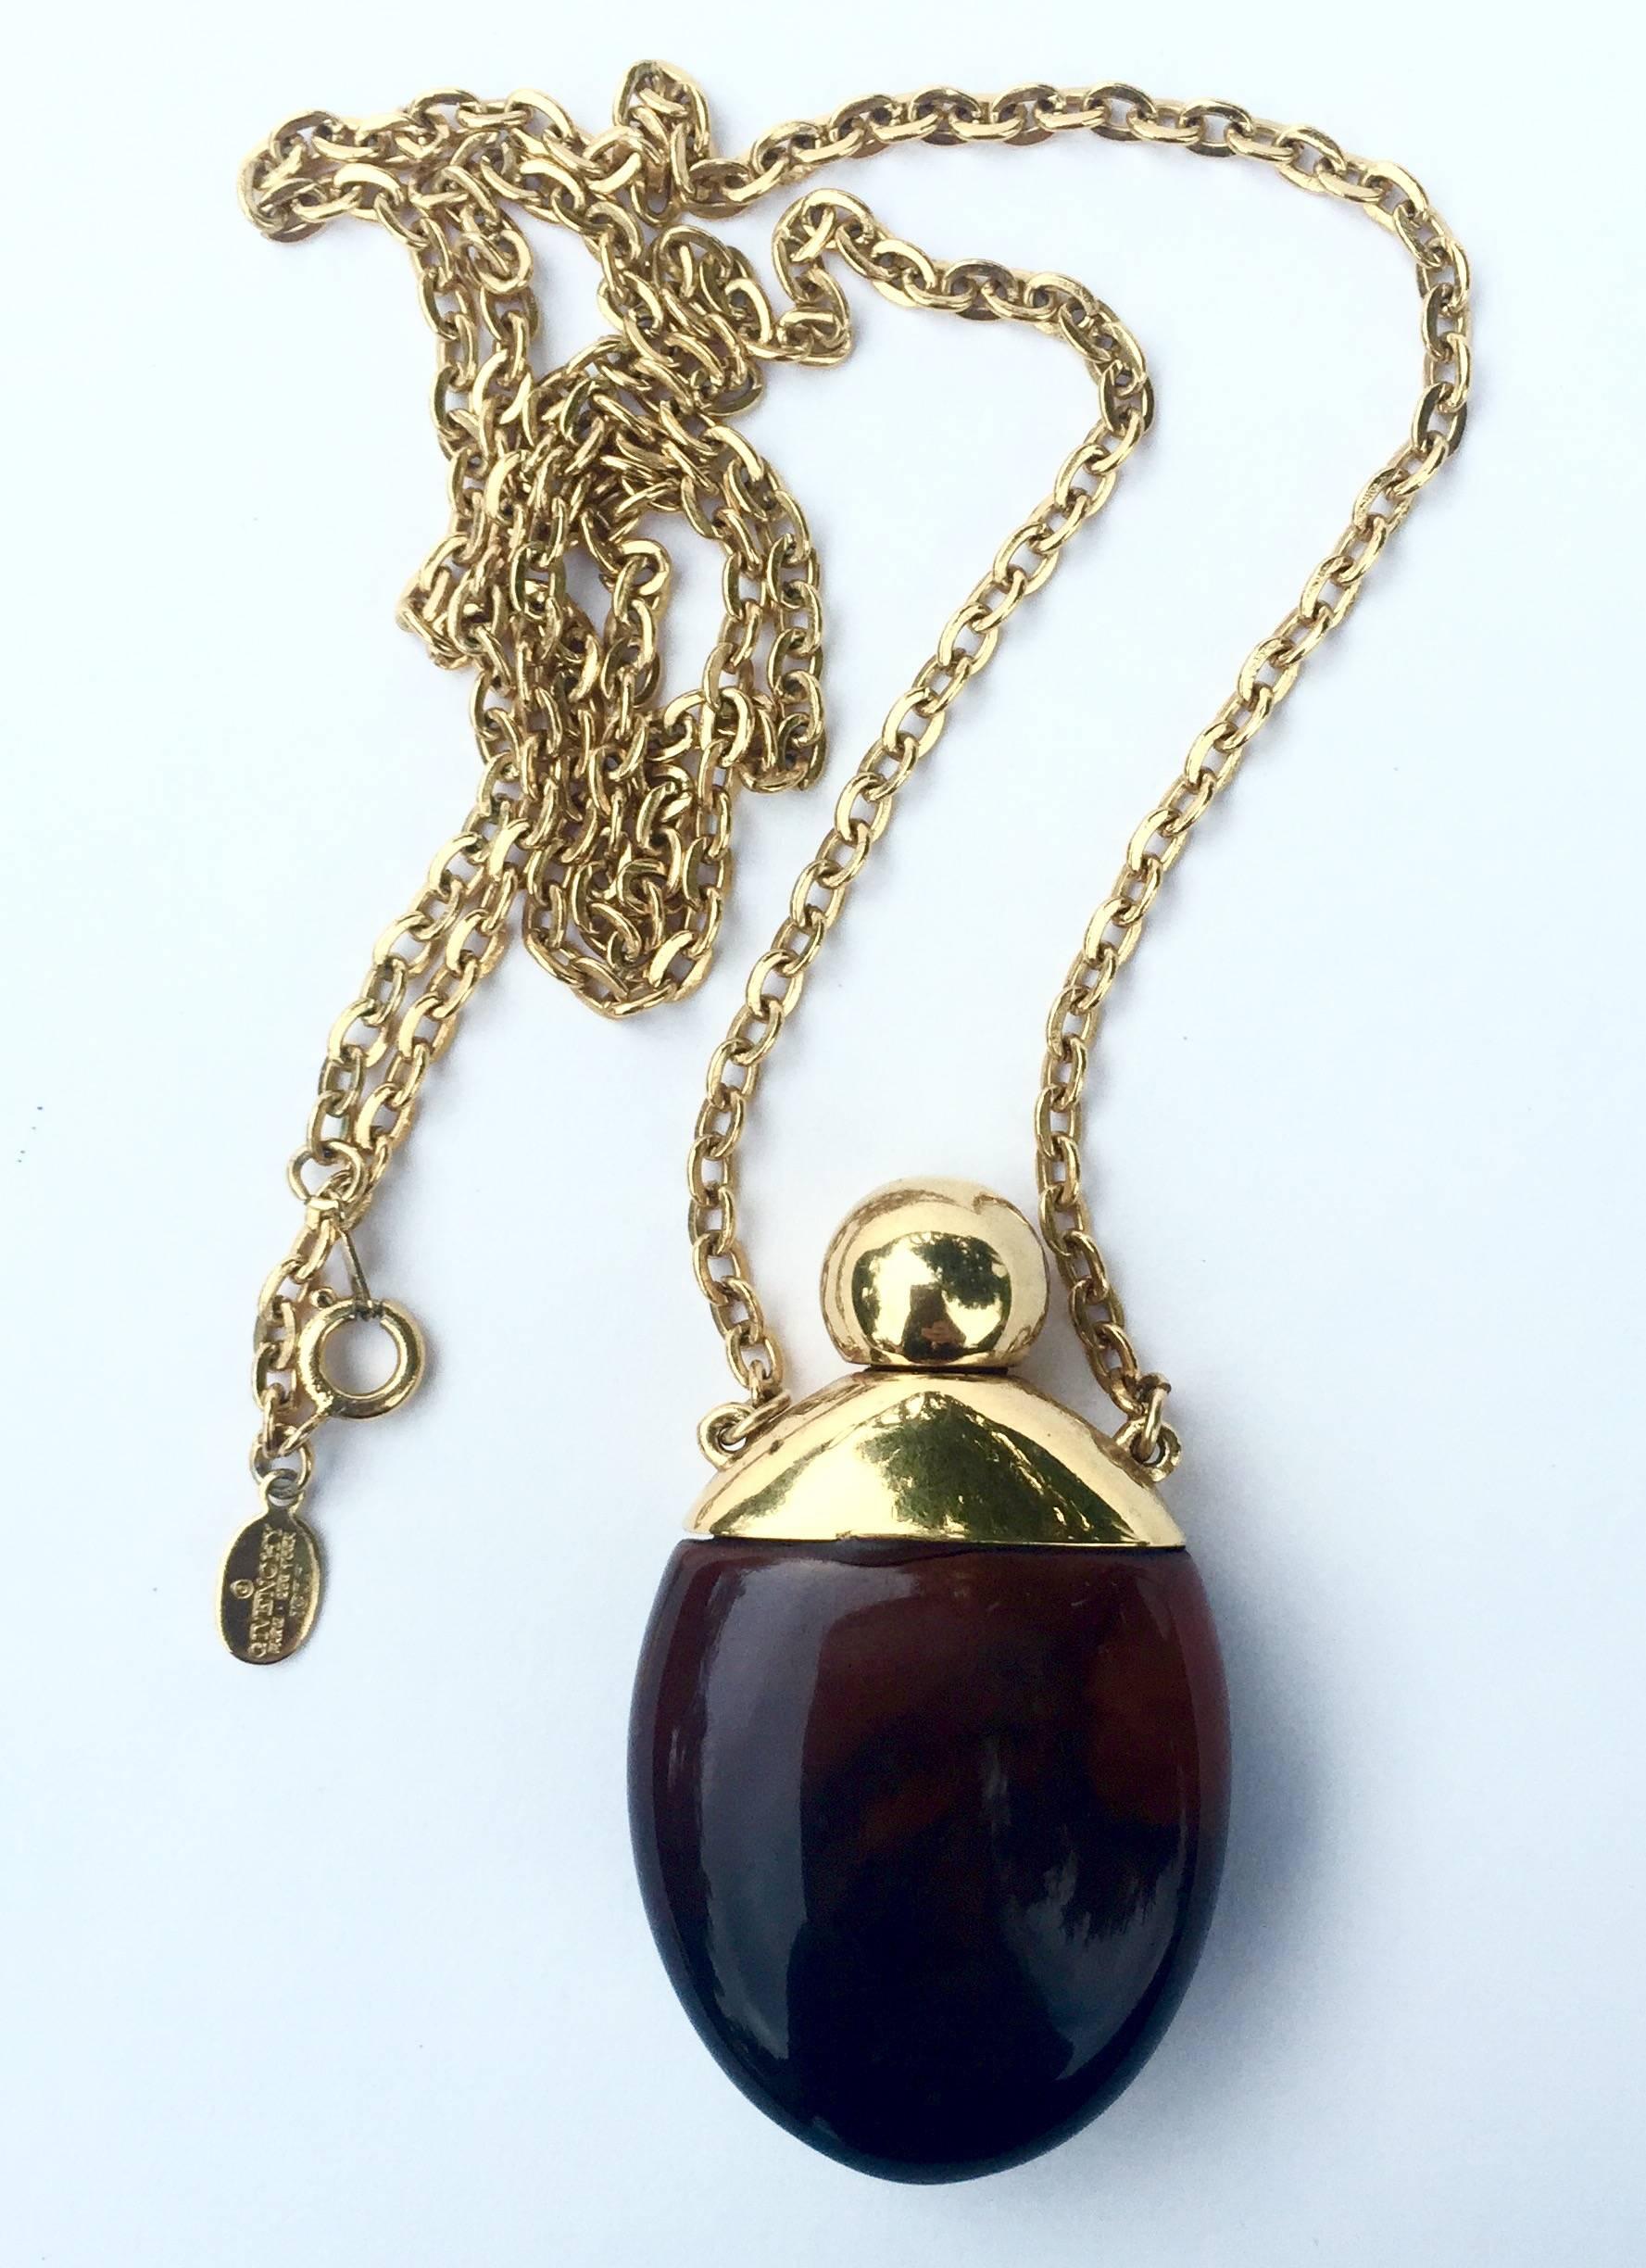 Art Deco Givenchy Vintage Perfume Bottle Necklace Gold-Toned Link Chain Tortoise, 1970s  For Sale